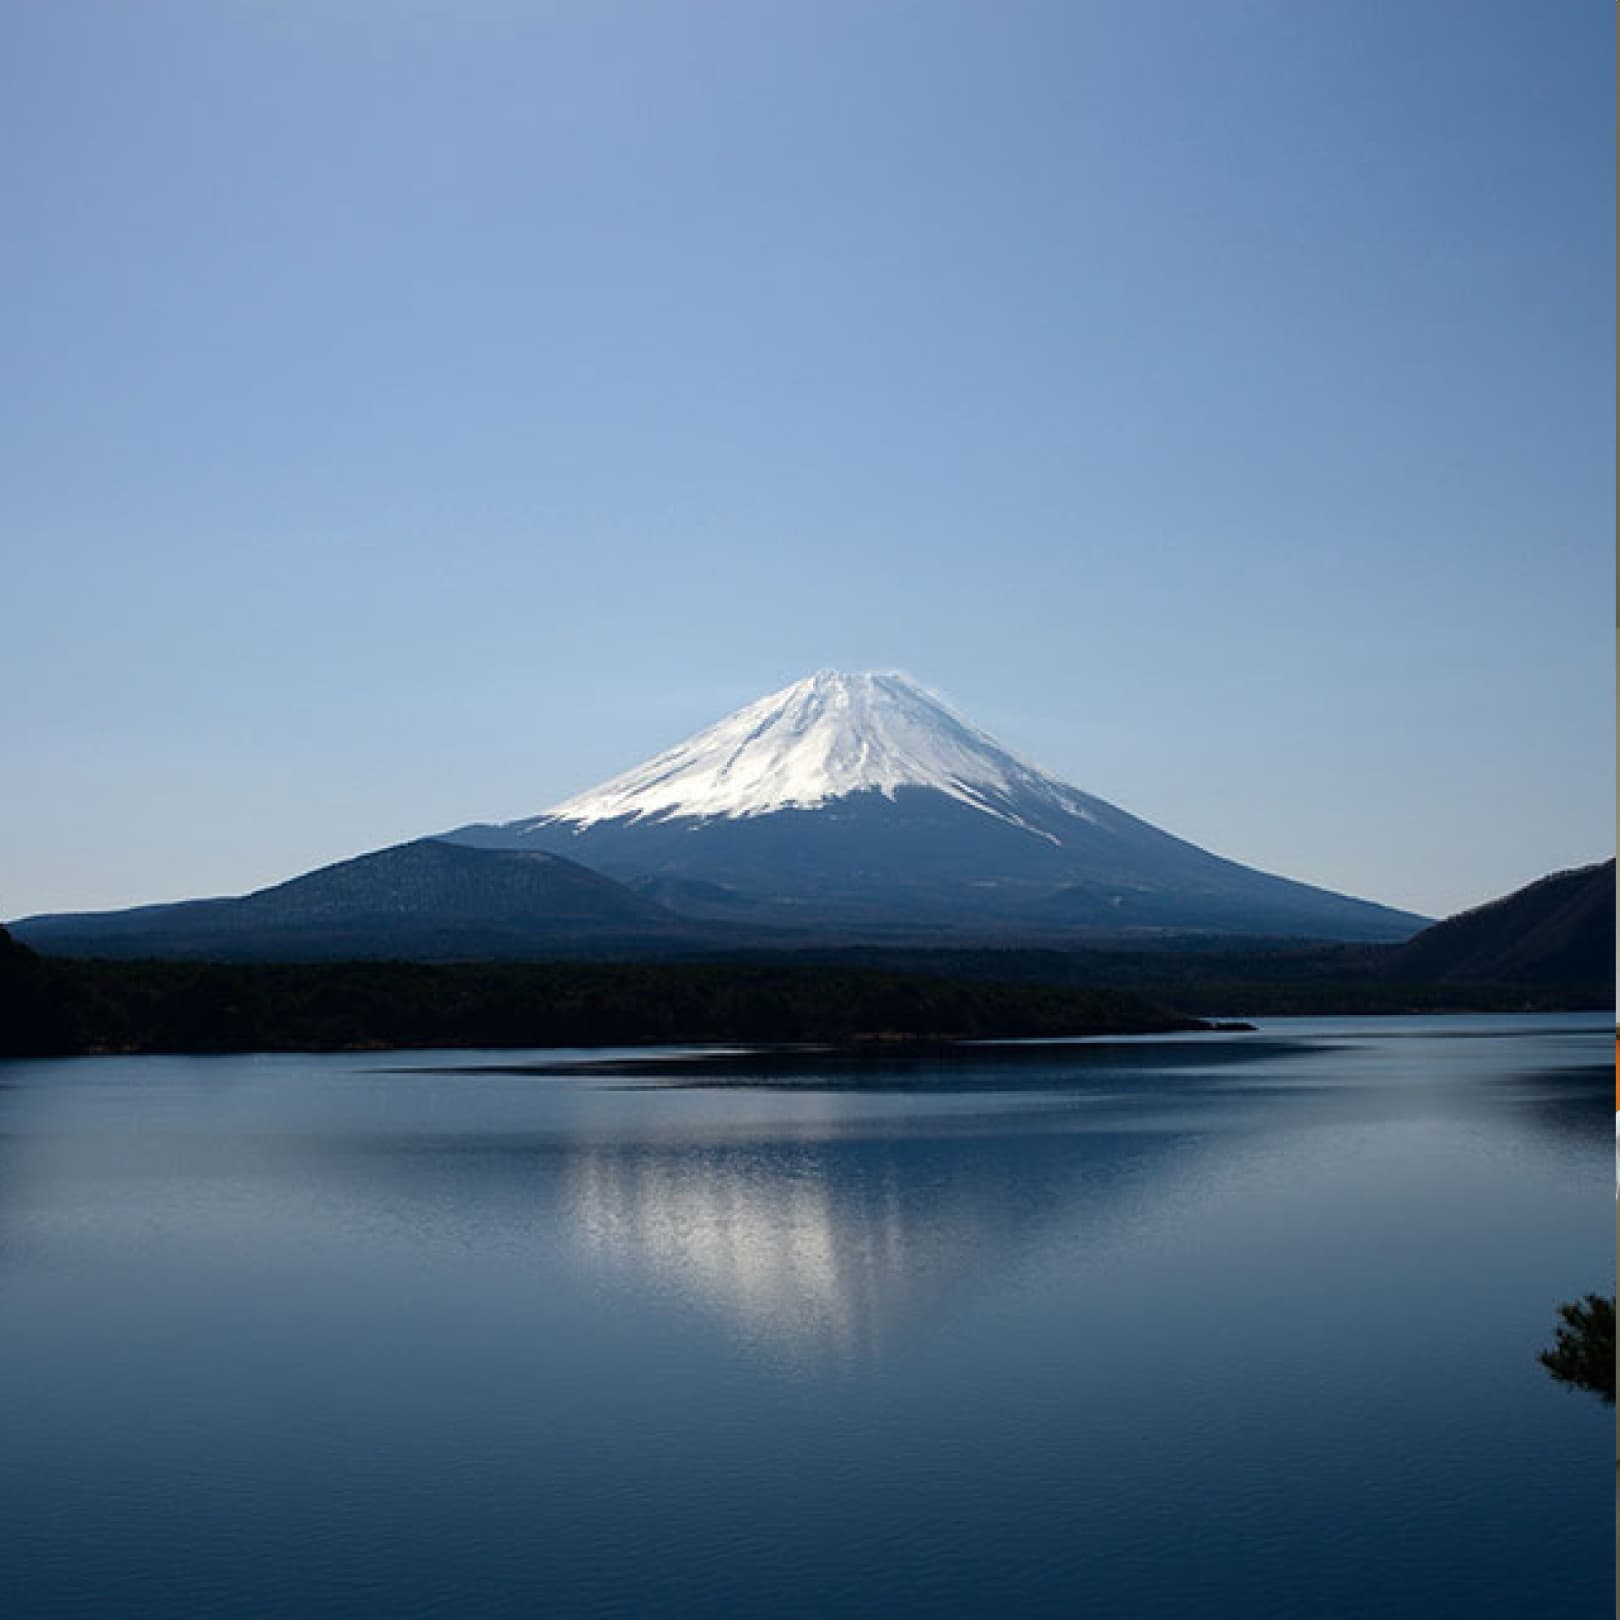 At the foot of Mt. Fuji is where we found delicious 100% natural water. We cook and furnish our guest rooms and spa with one of Japan’s best ultra-soft water.